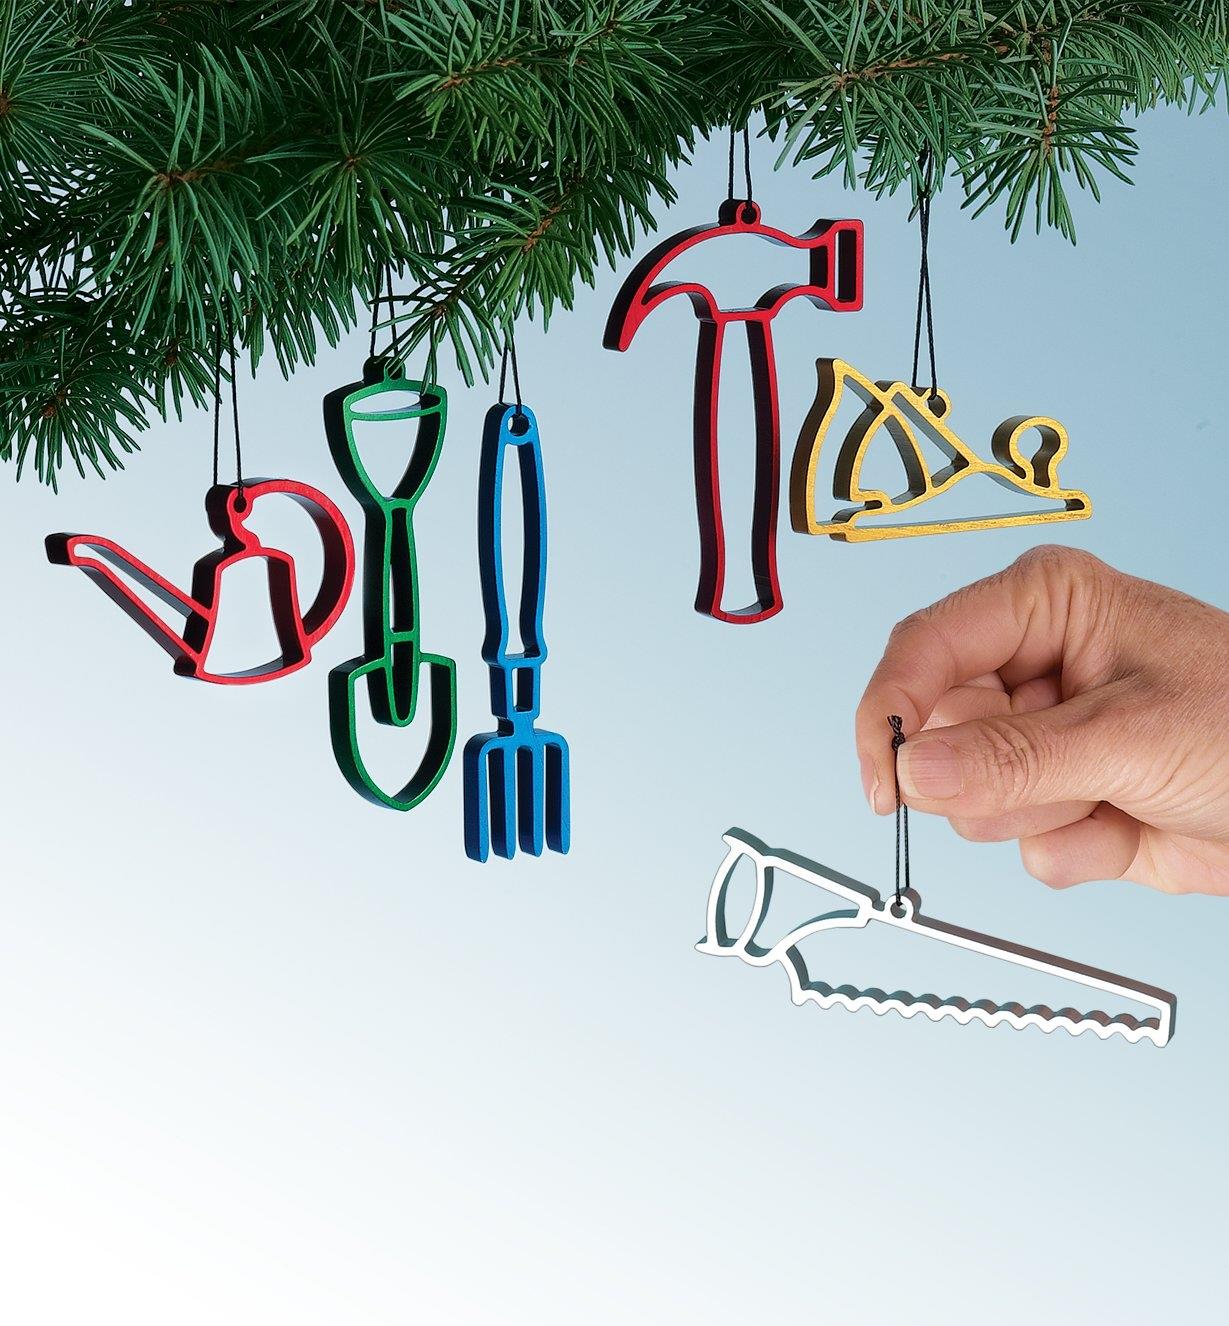 Six Lee Valley Ornaments being hung on a Christmas tree